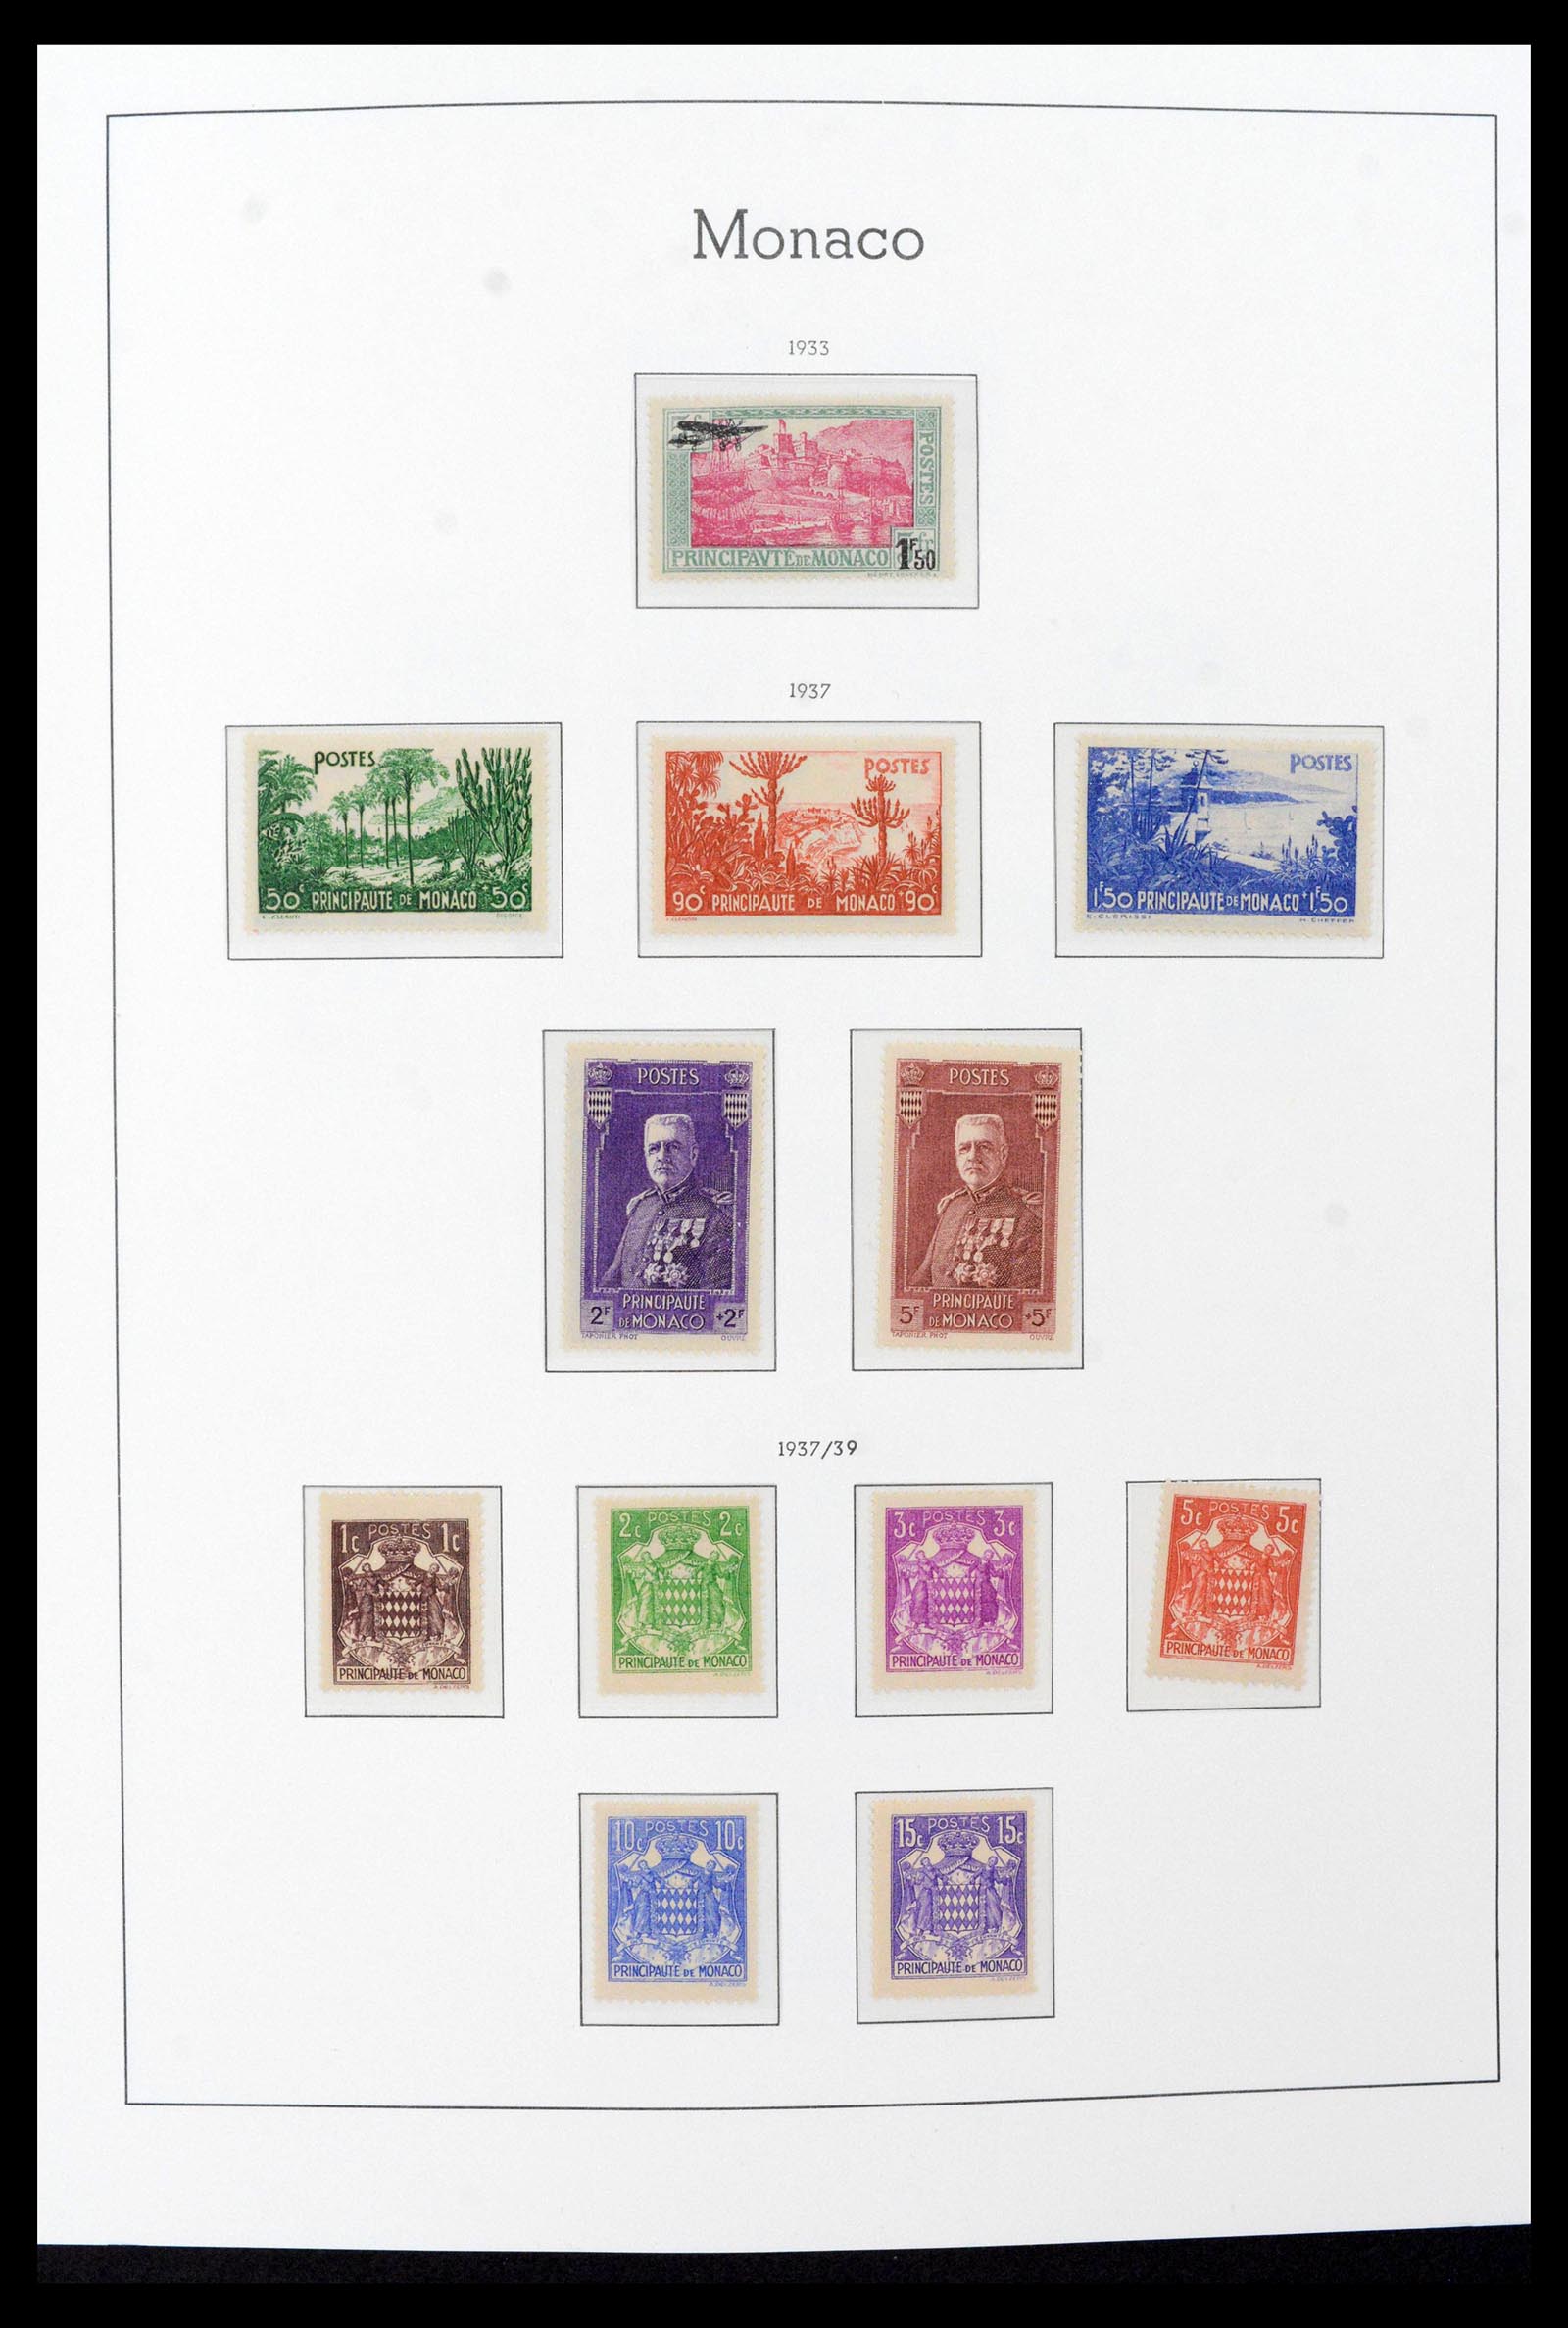 39390 0013 - Stamp collection 39390 Monaco complete 1885-1990.